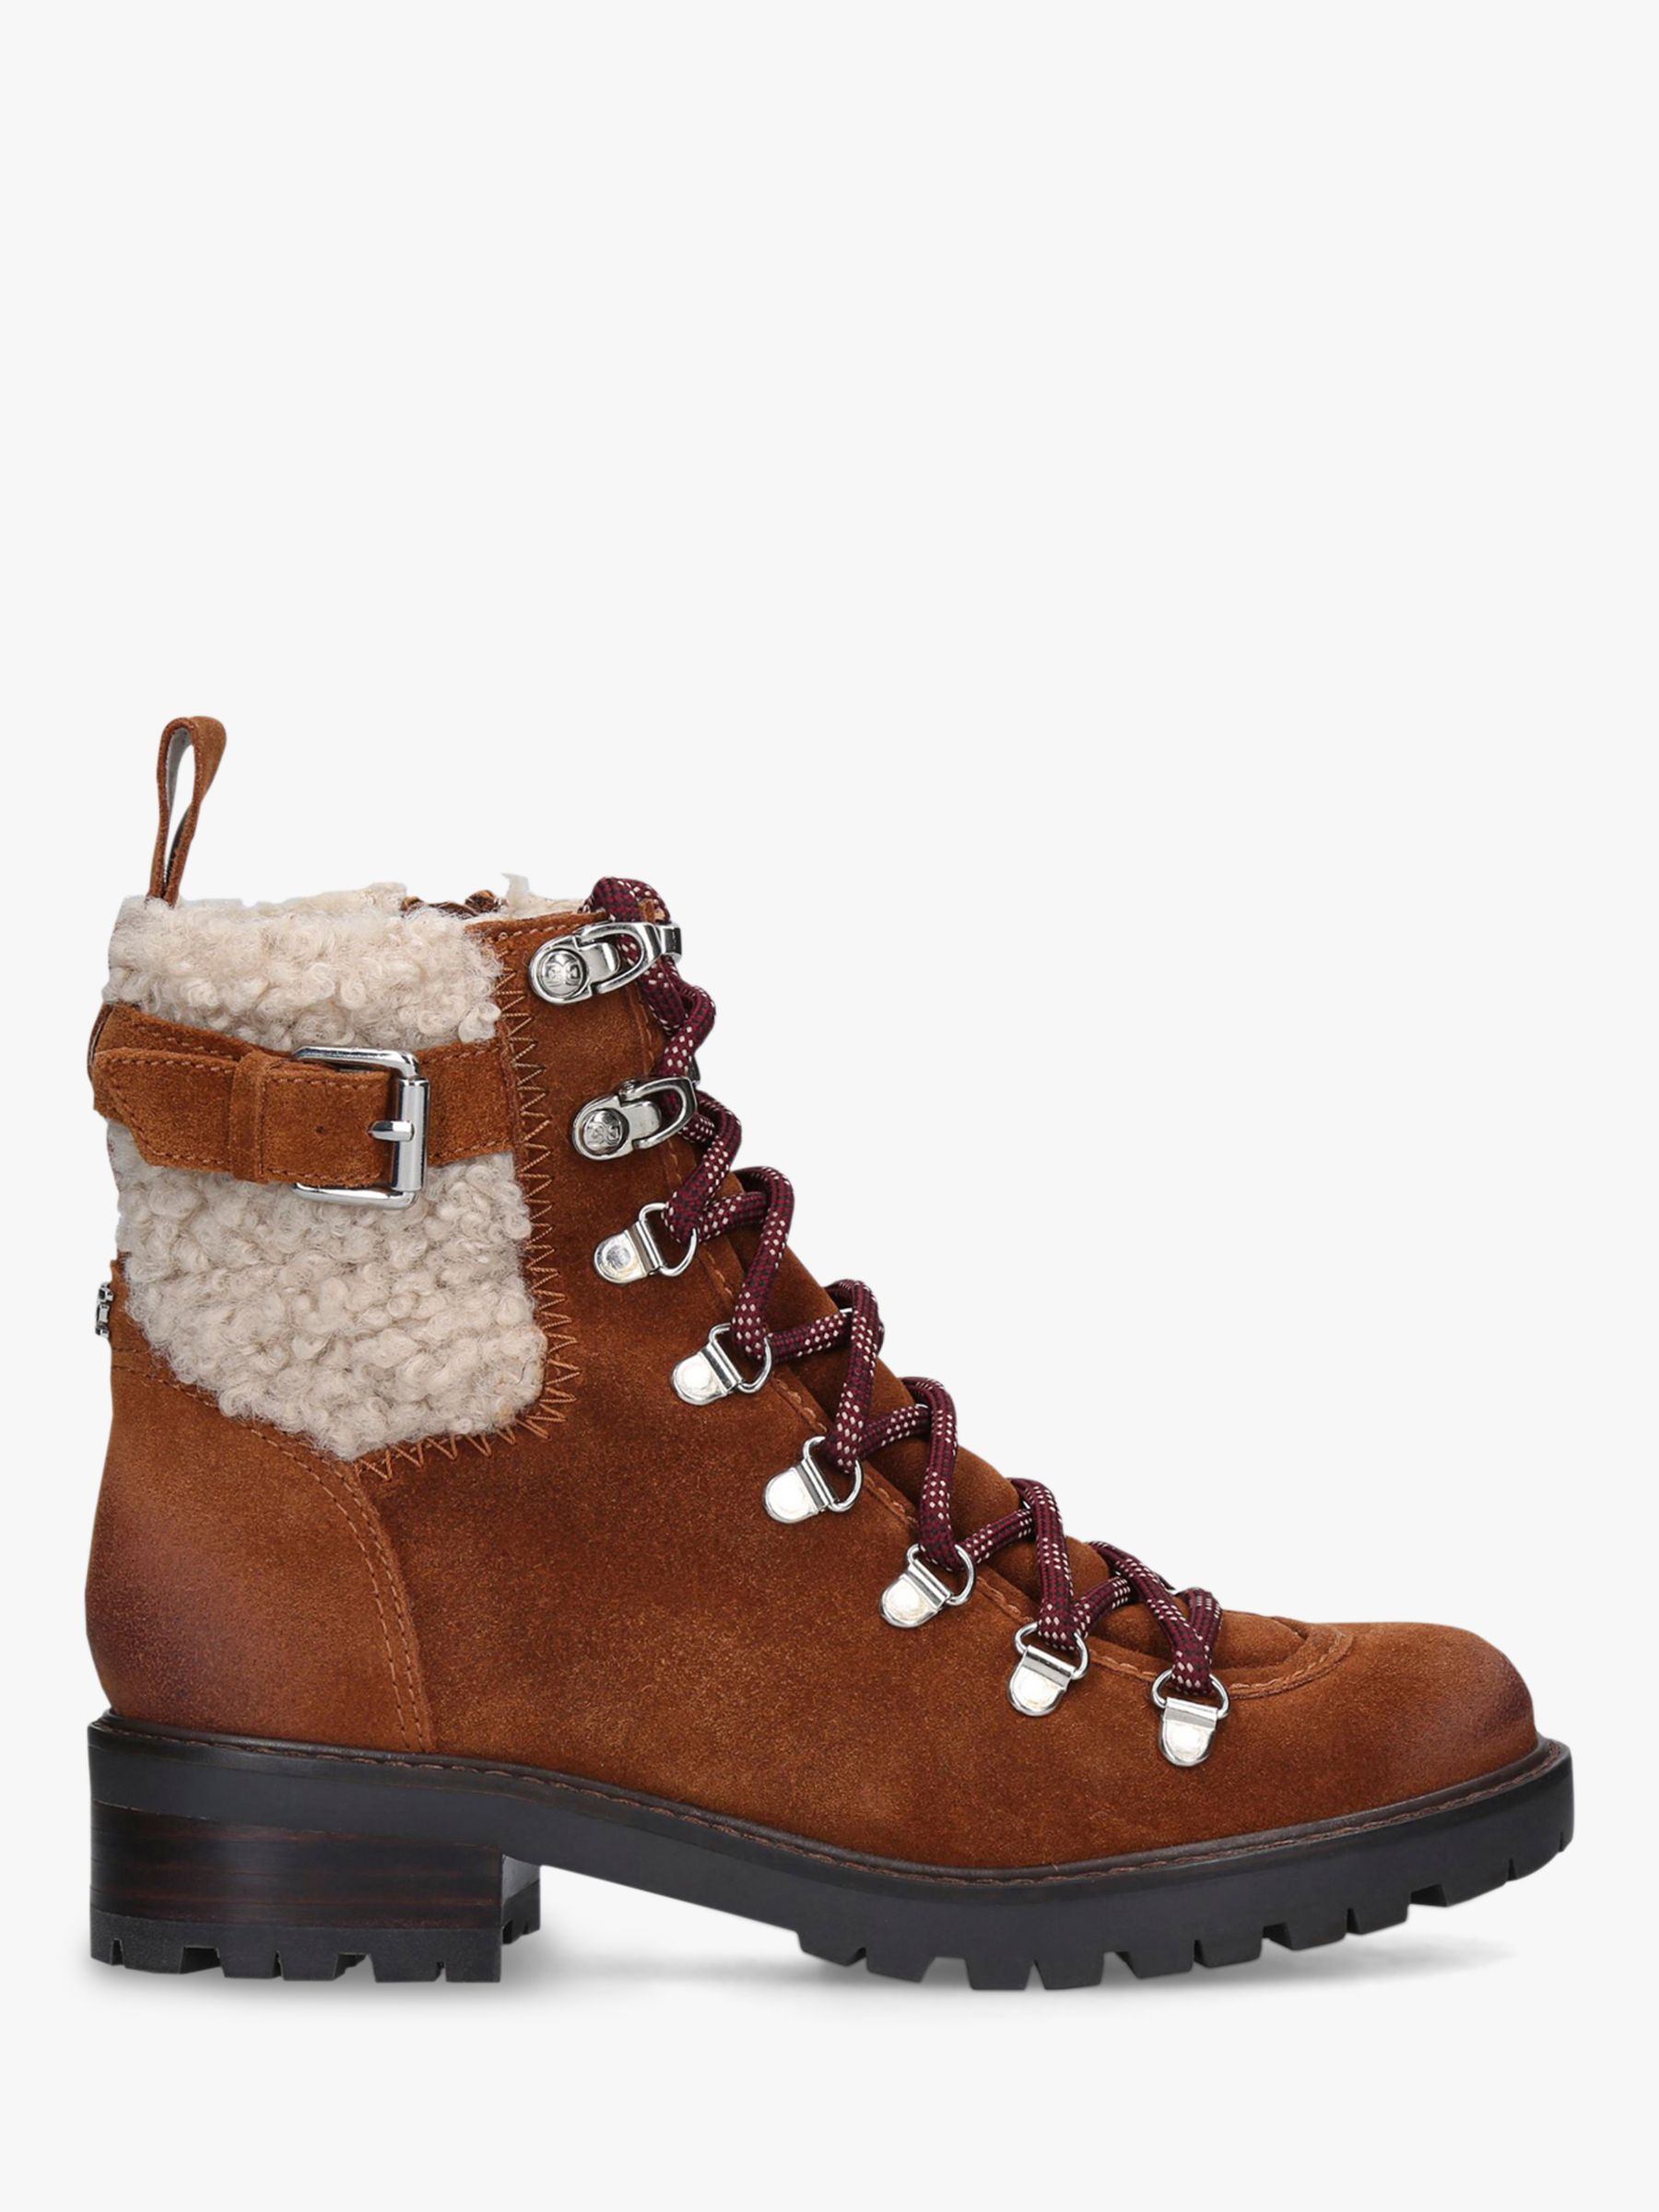 Sam Edelman Tenlee Leather Ankle Boots at John Lewis & Partners